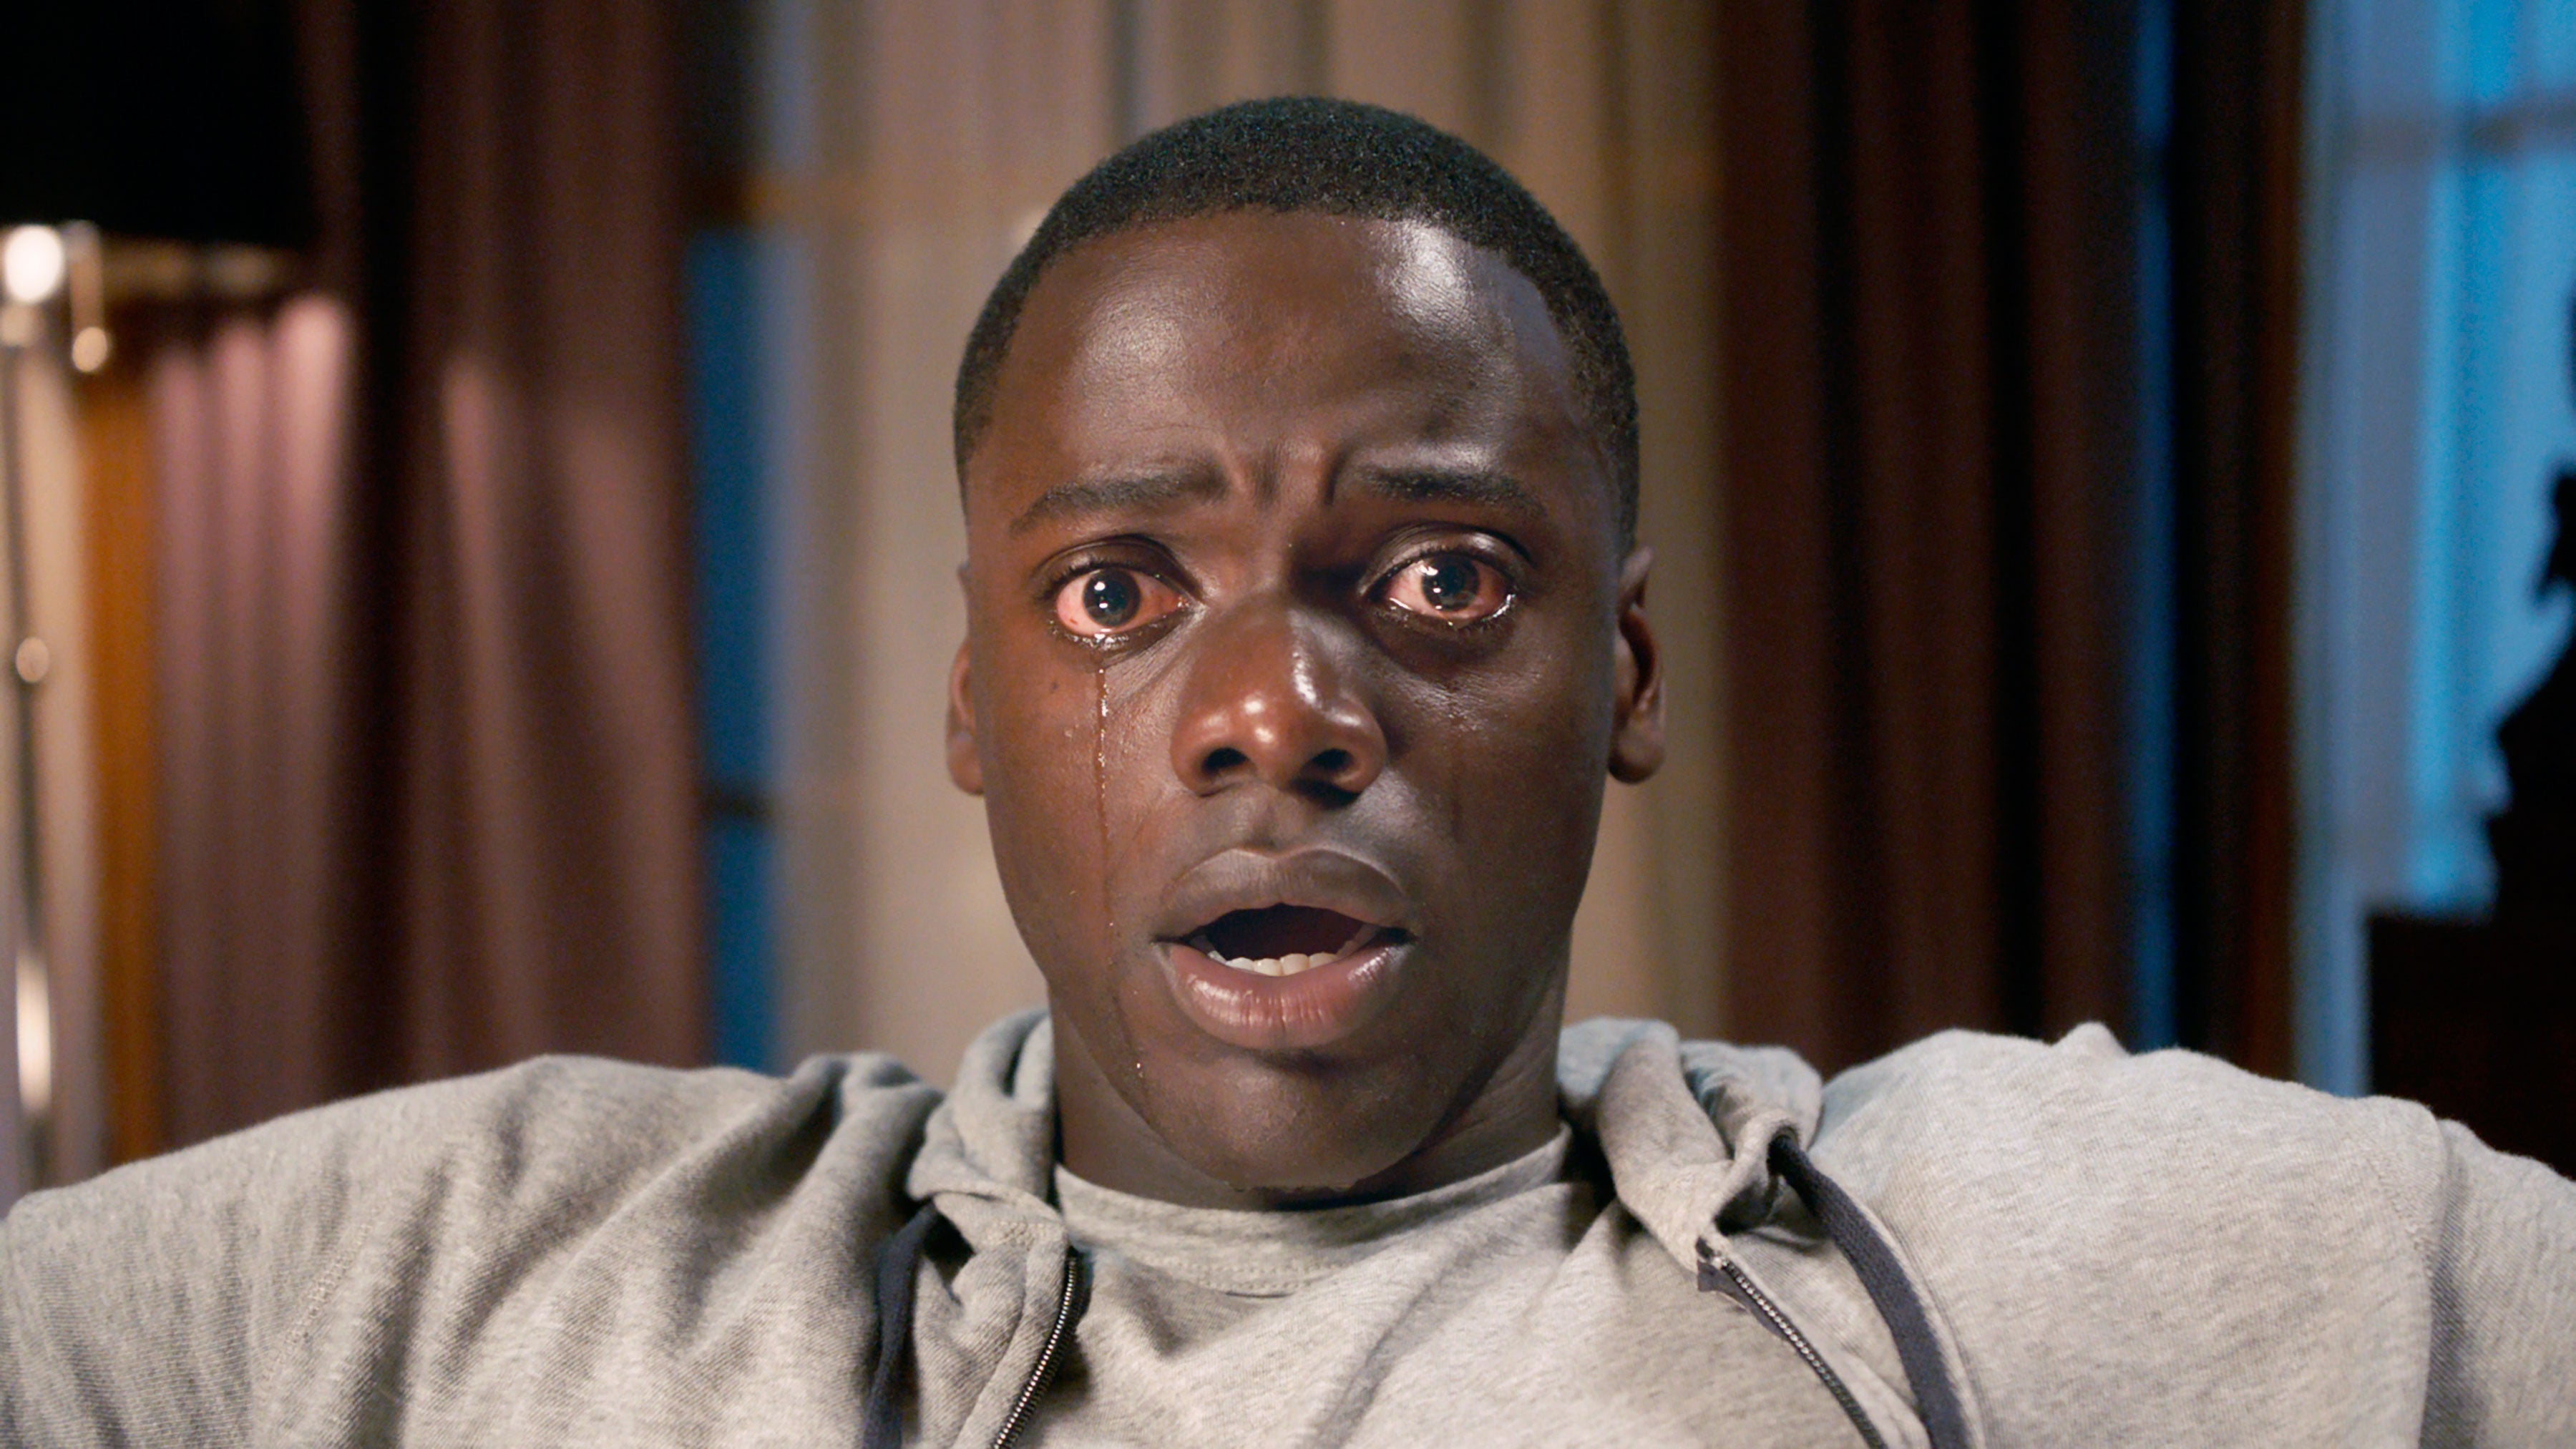 Some Academy Voters Are Dismissing 'Get Out' Without Even Seeing It
